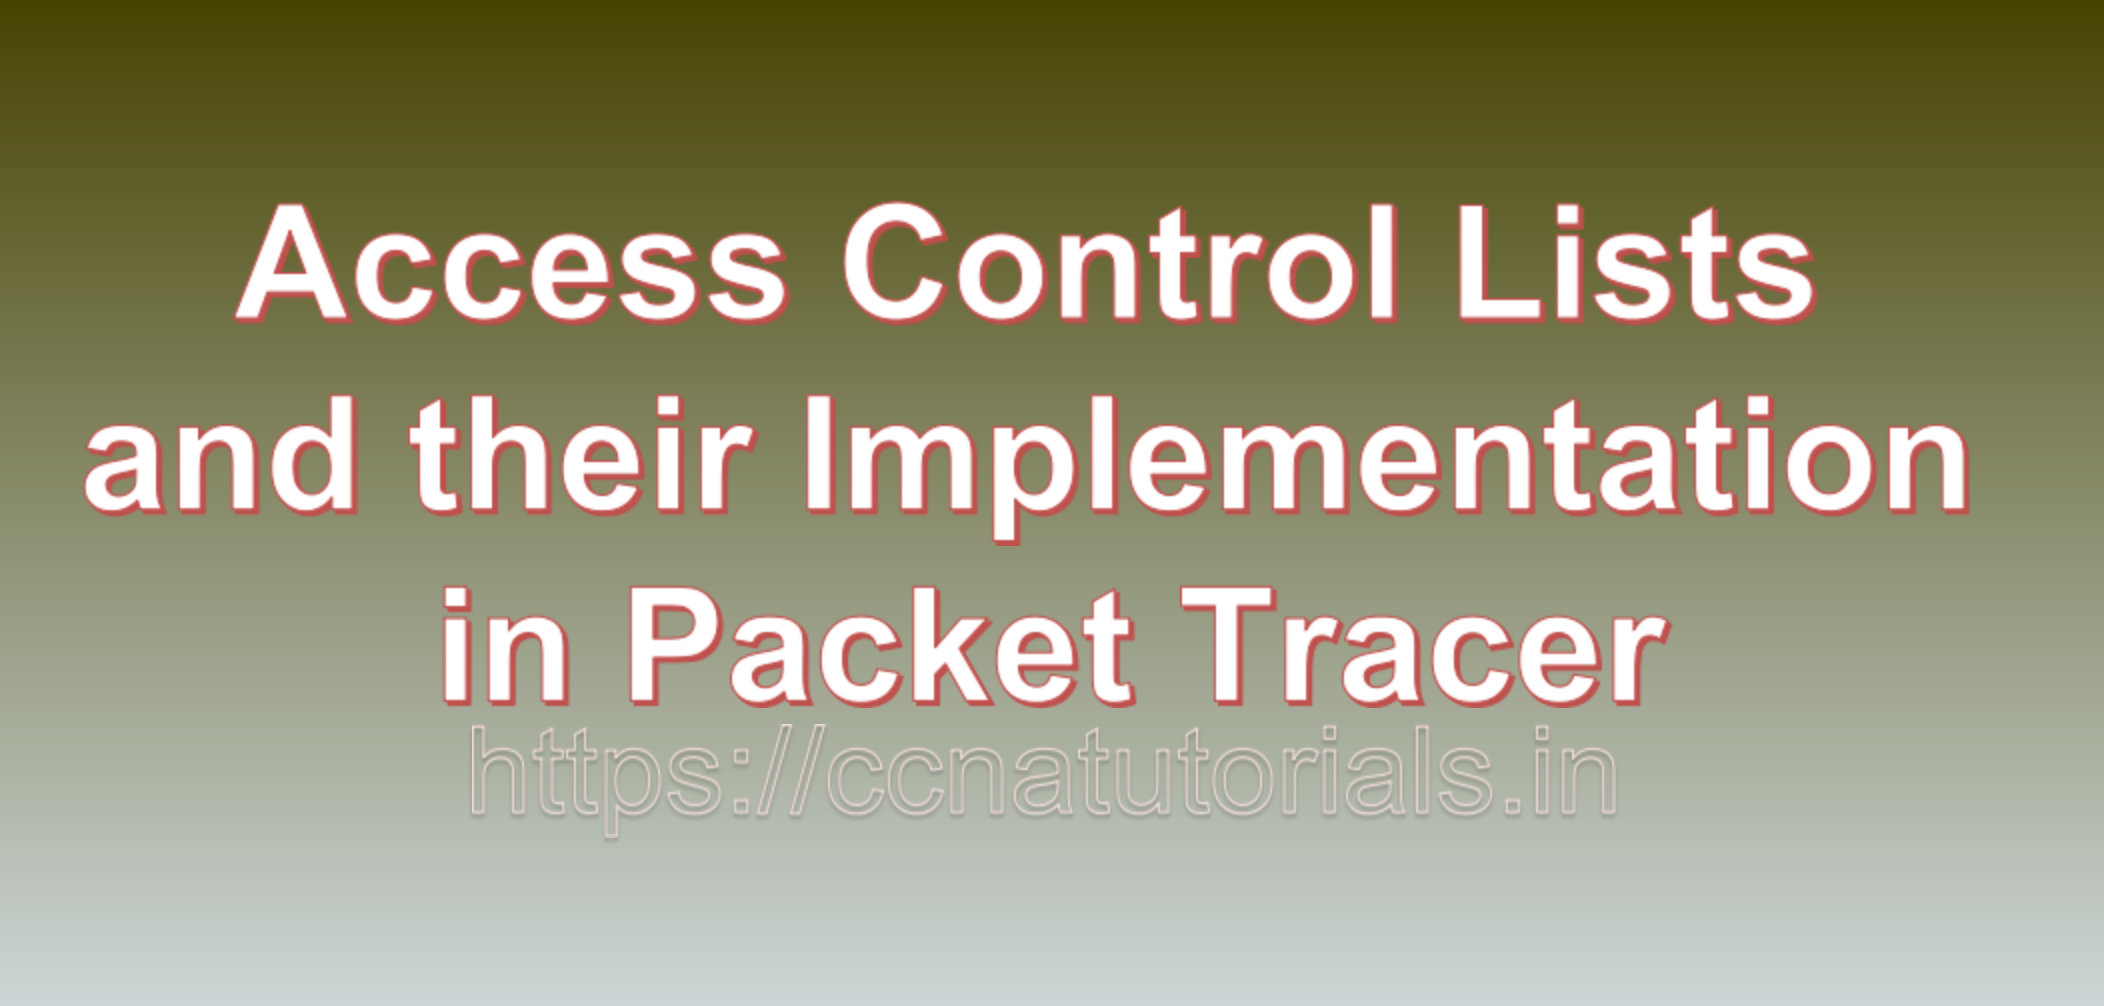 Access Control Lists and their Implementation in Packet Tracer, ccna, ccna tutorials